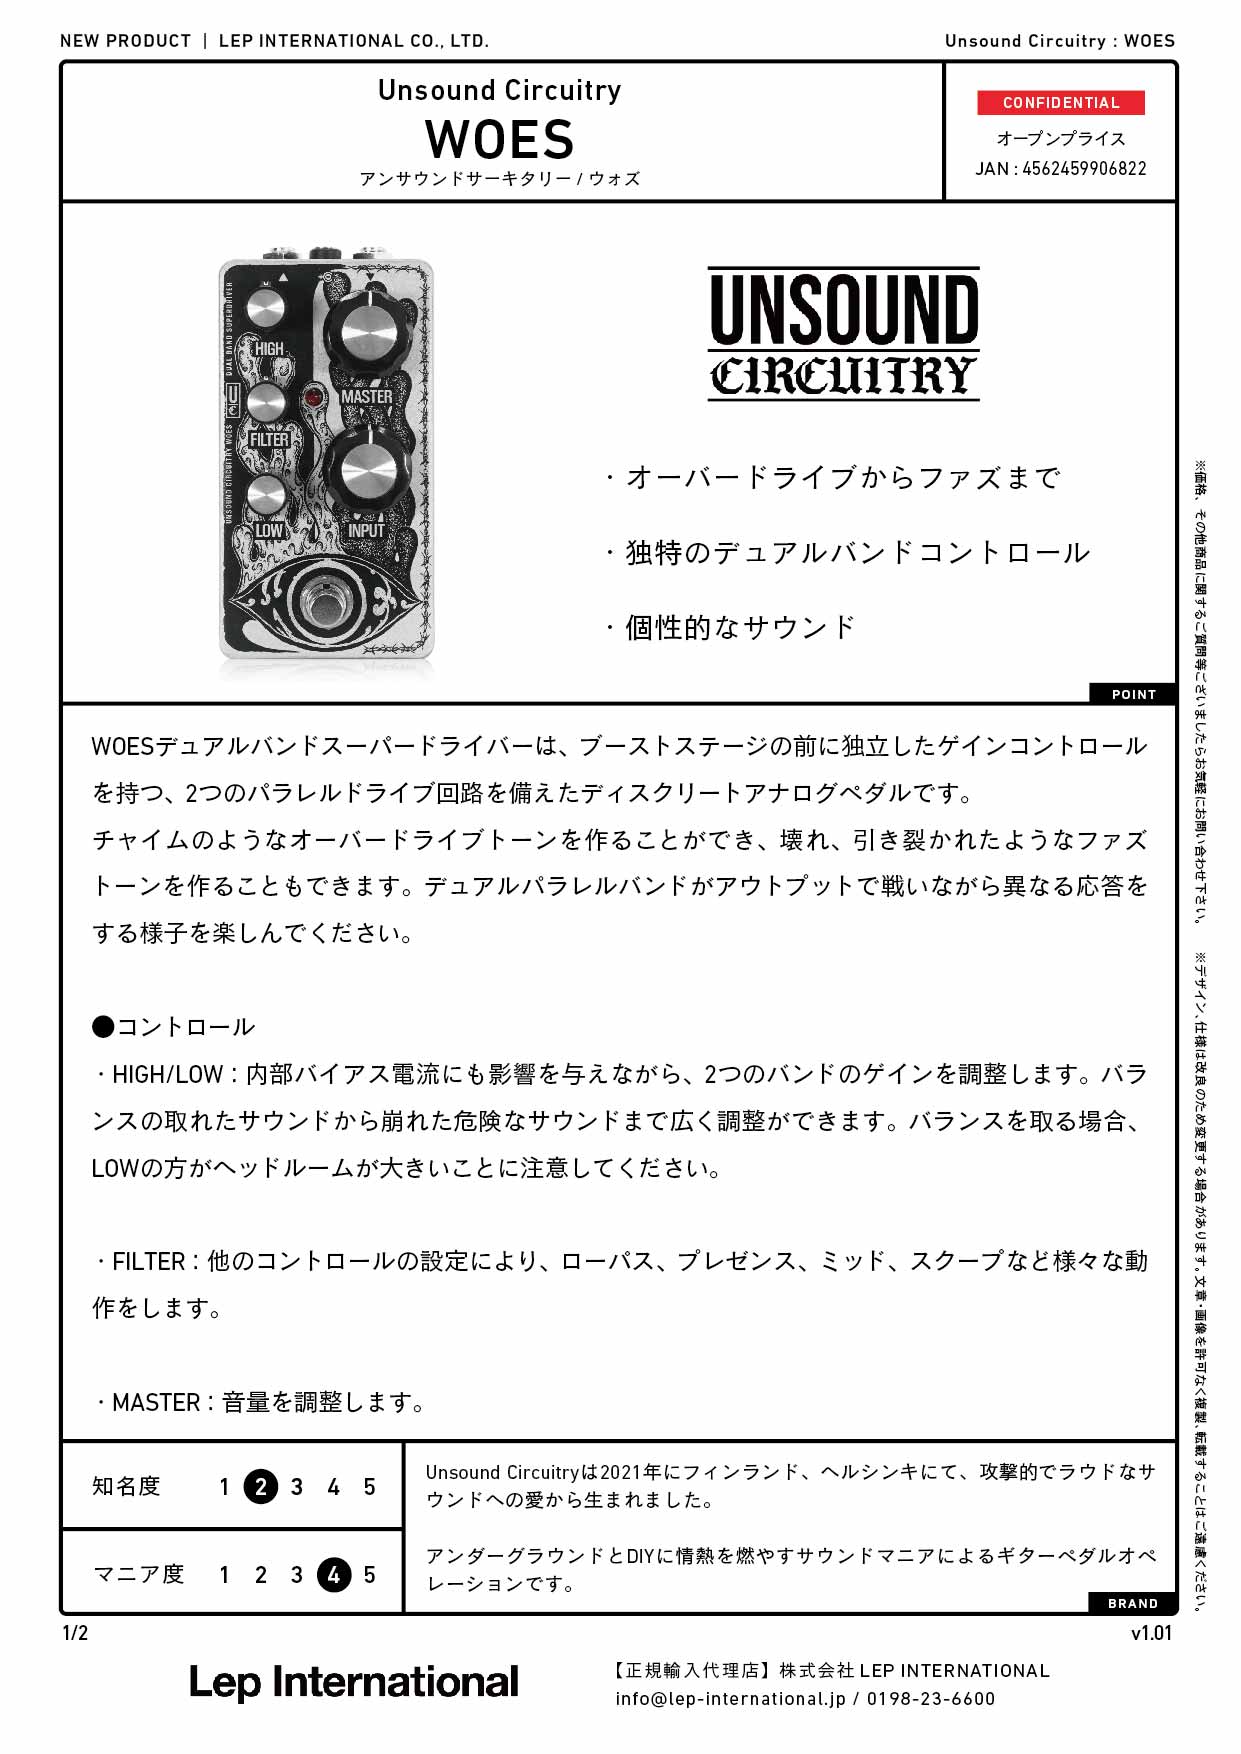 Unsound Circuitry / WOES